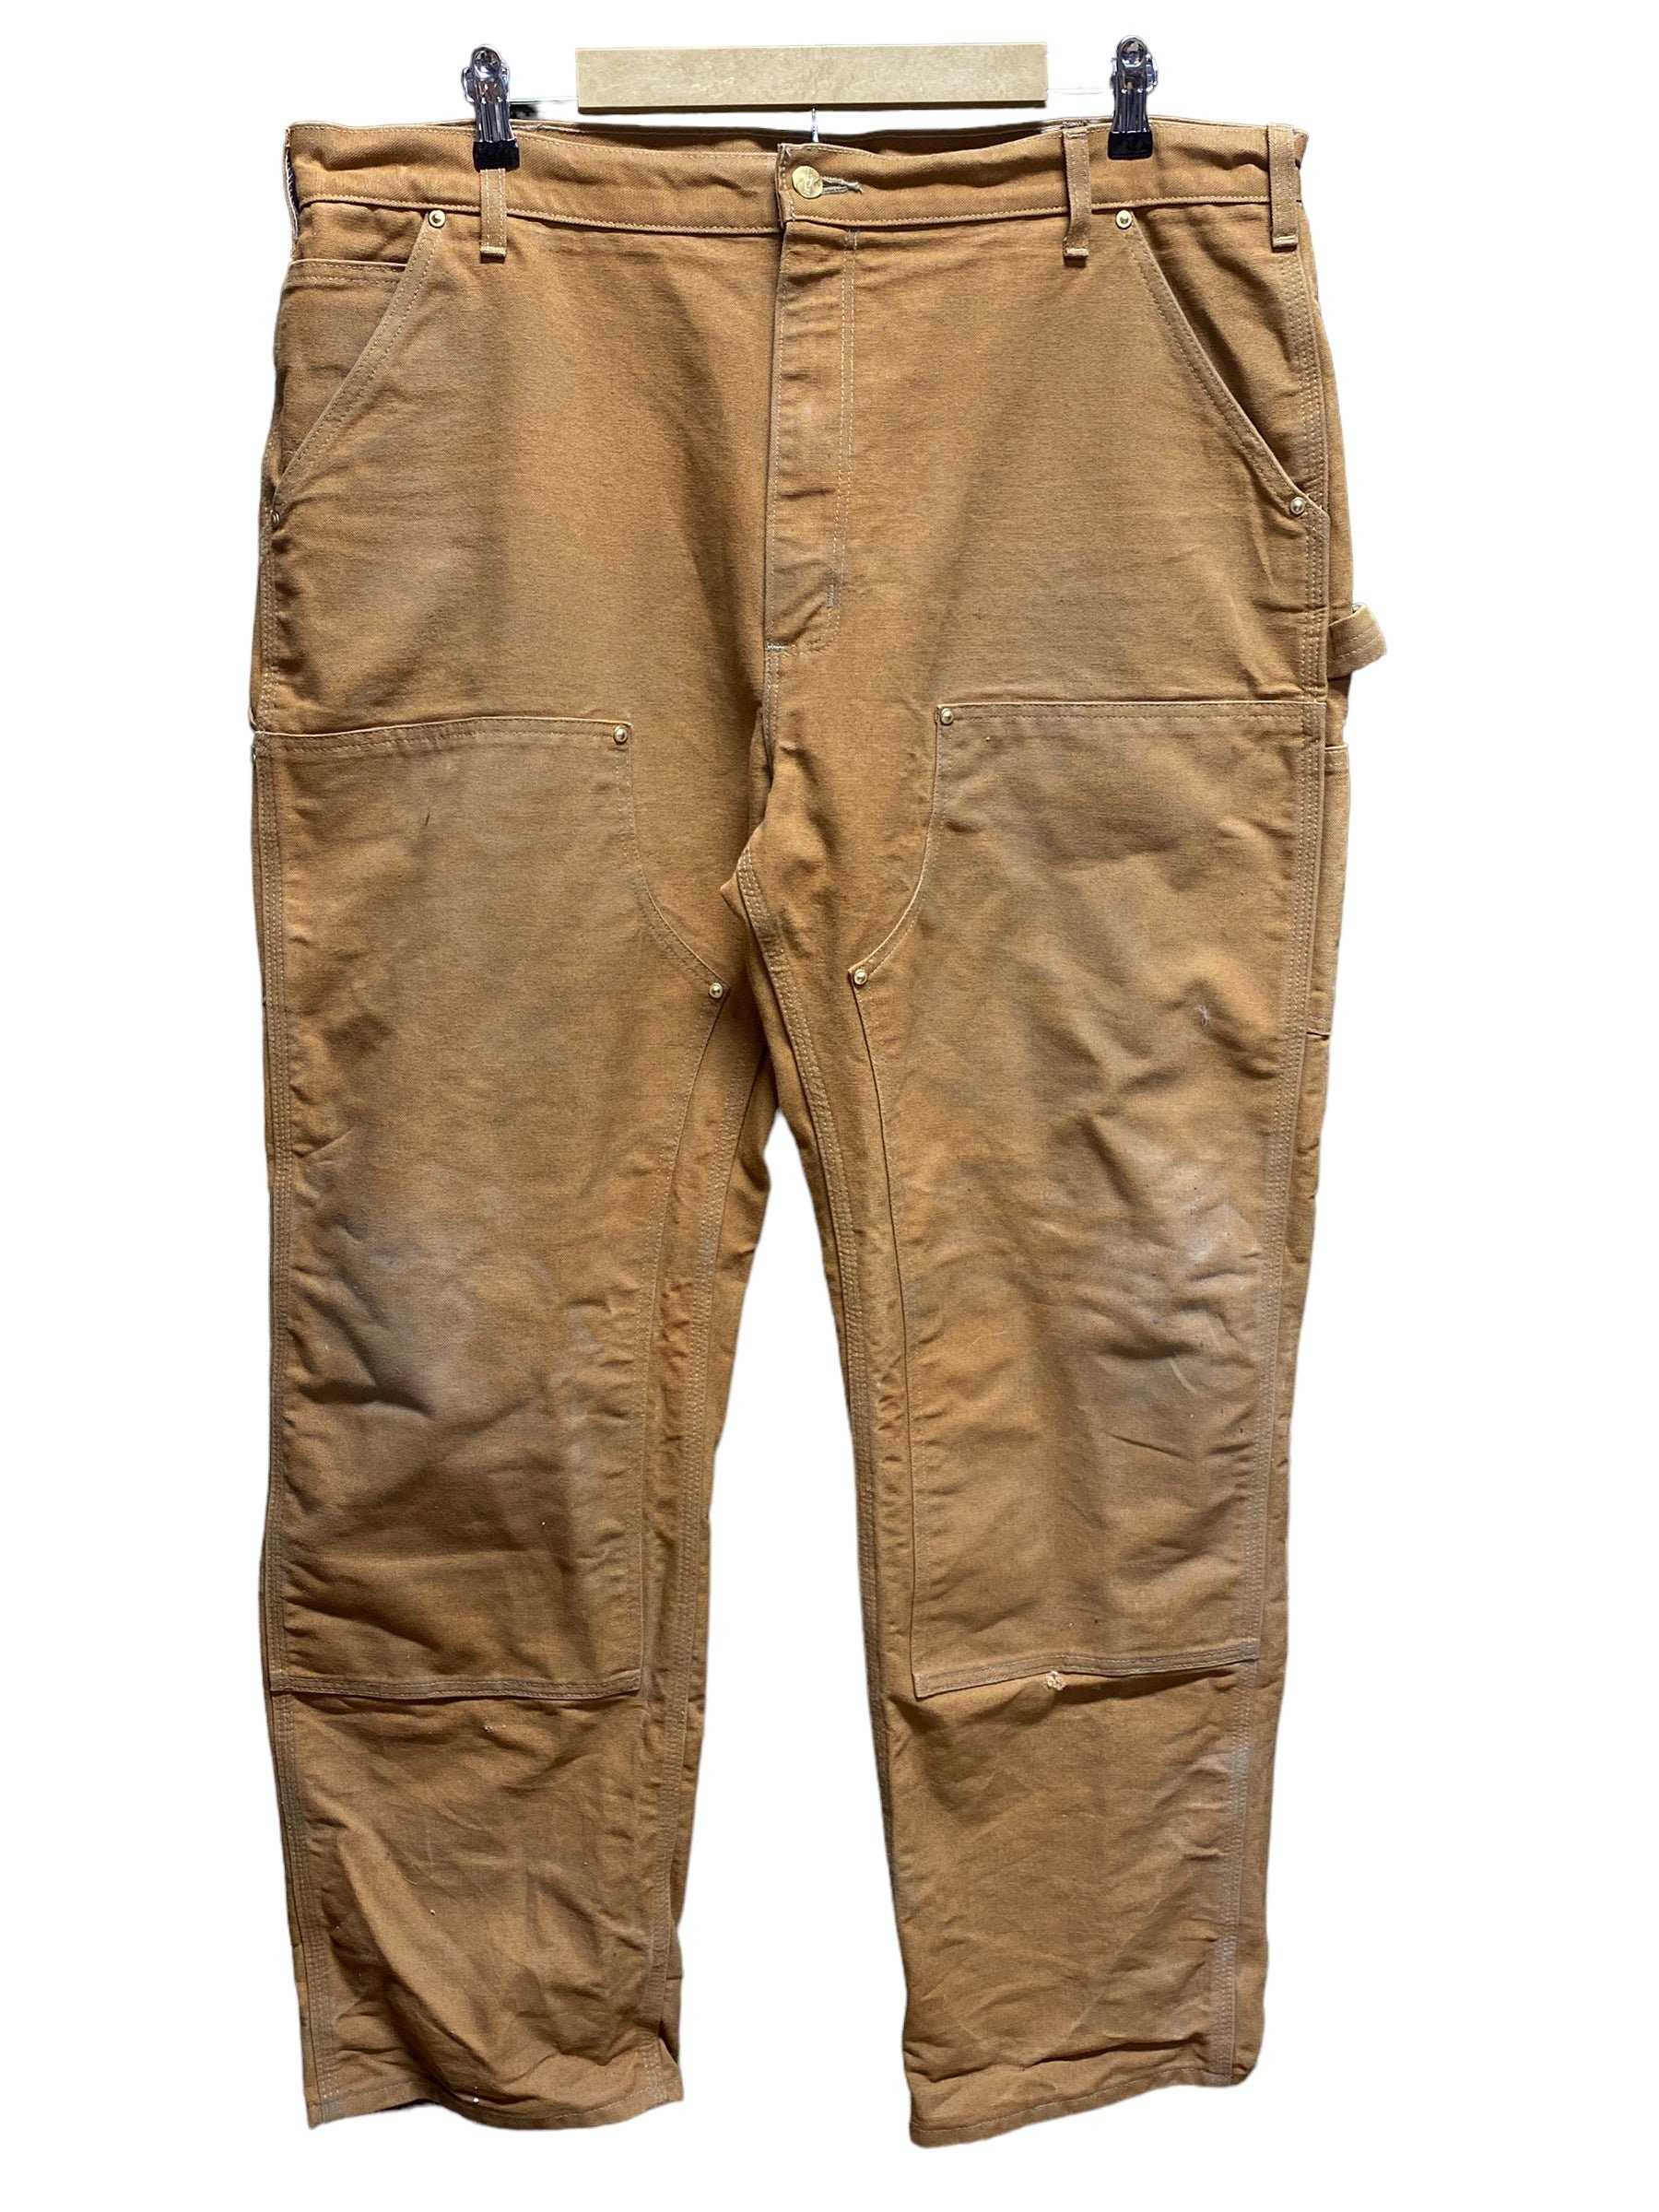 Carhartt Pants Mens 32x34 Double Knee Made in USA Tan Loose Original Fit  Ripped